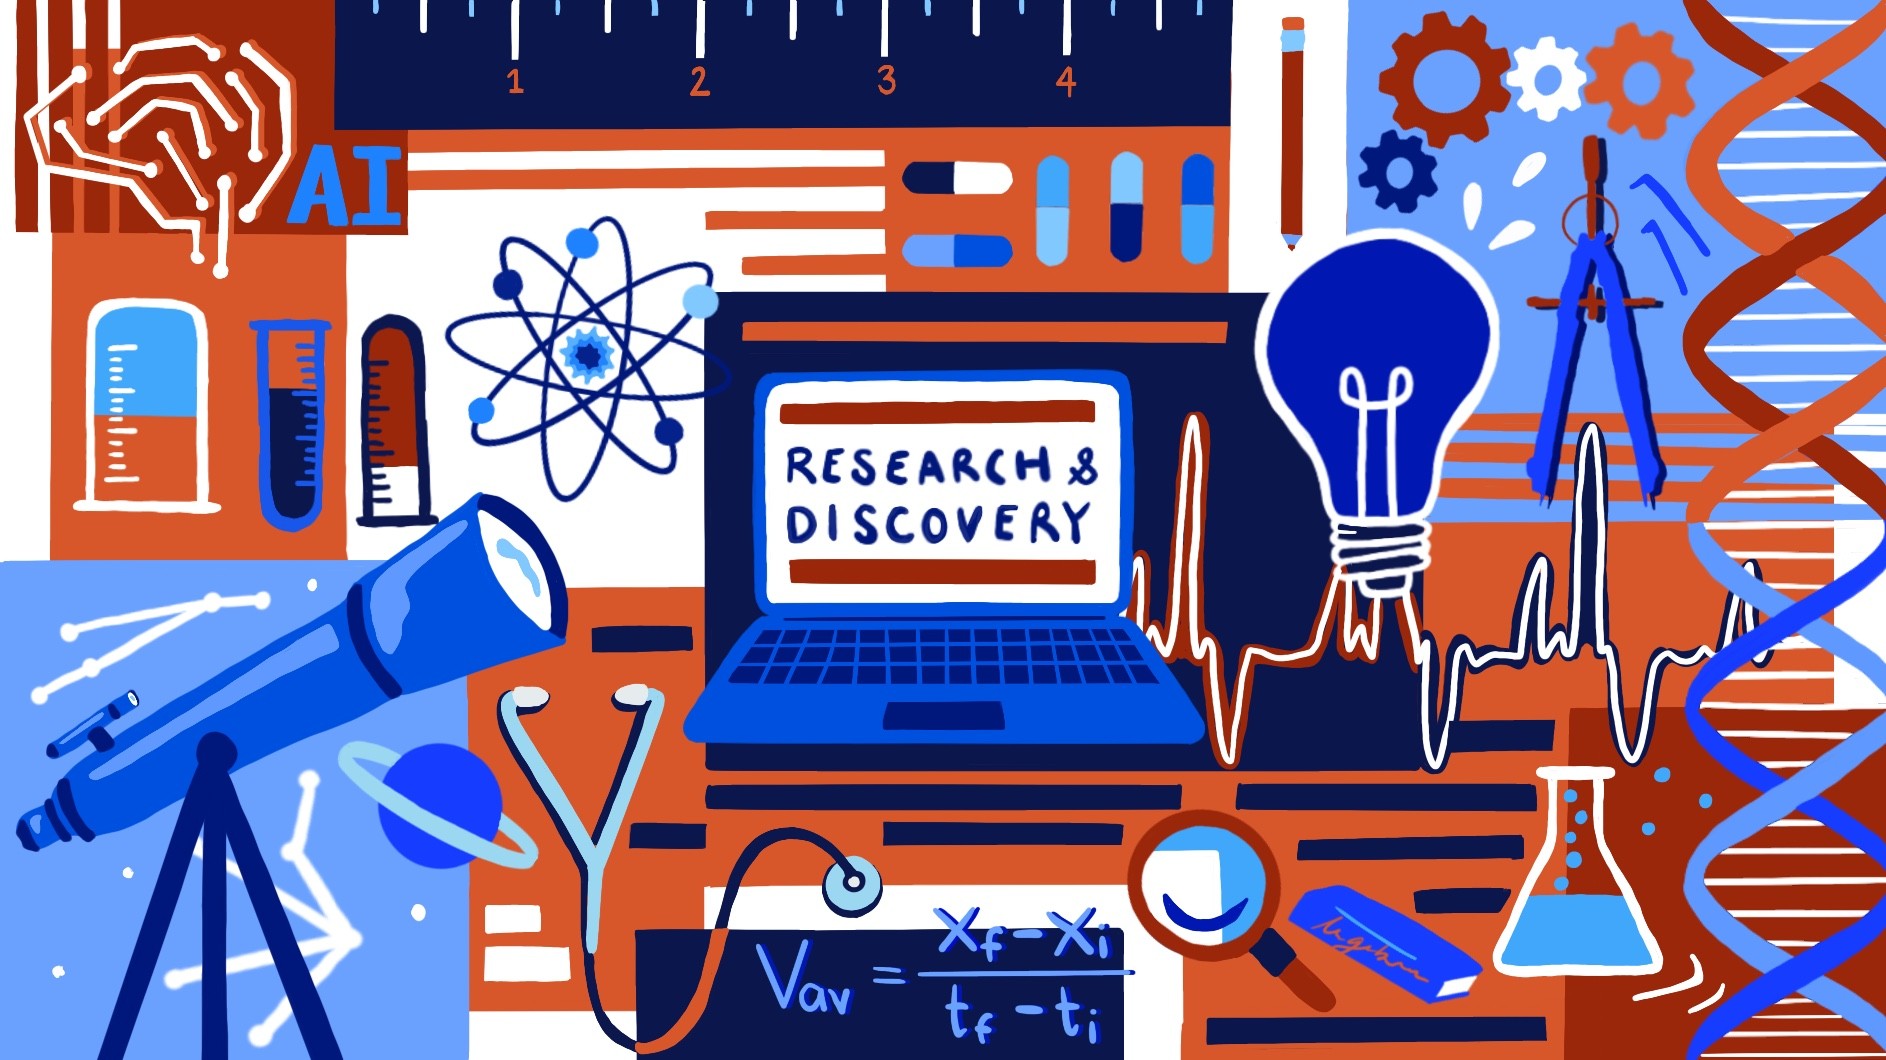 Research & Discovery | Columbia News